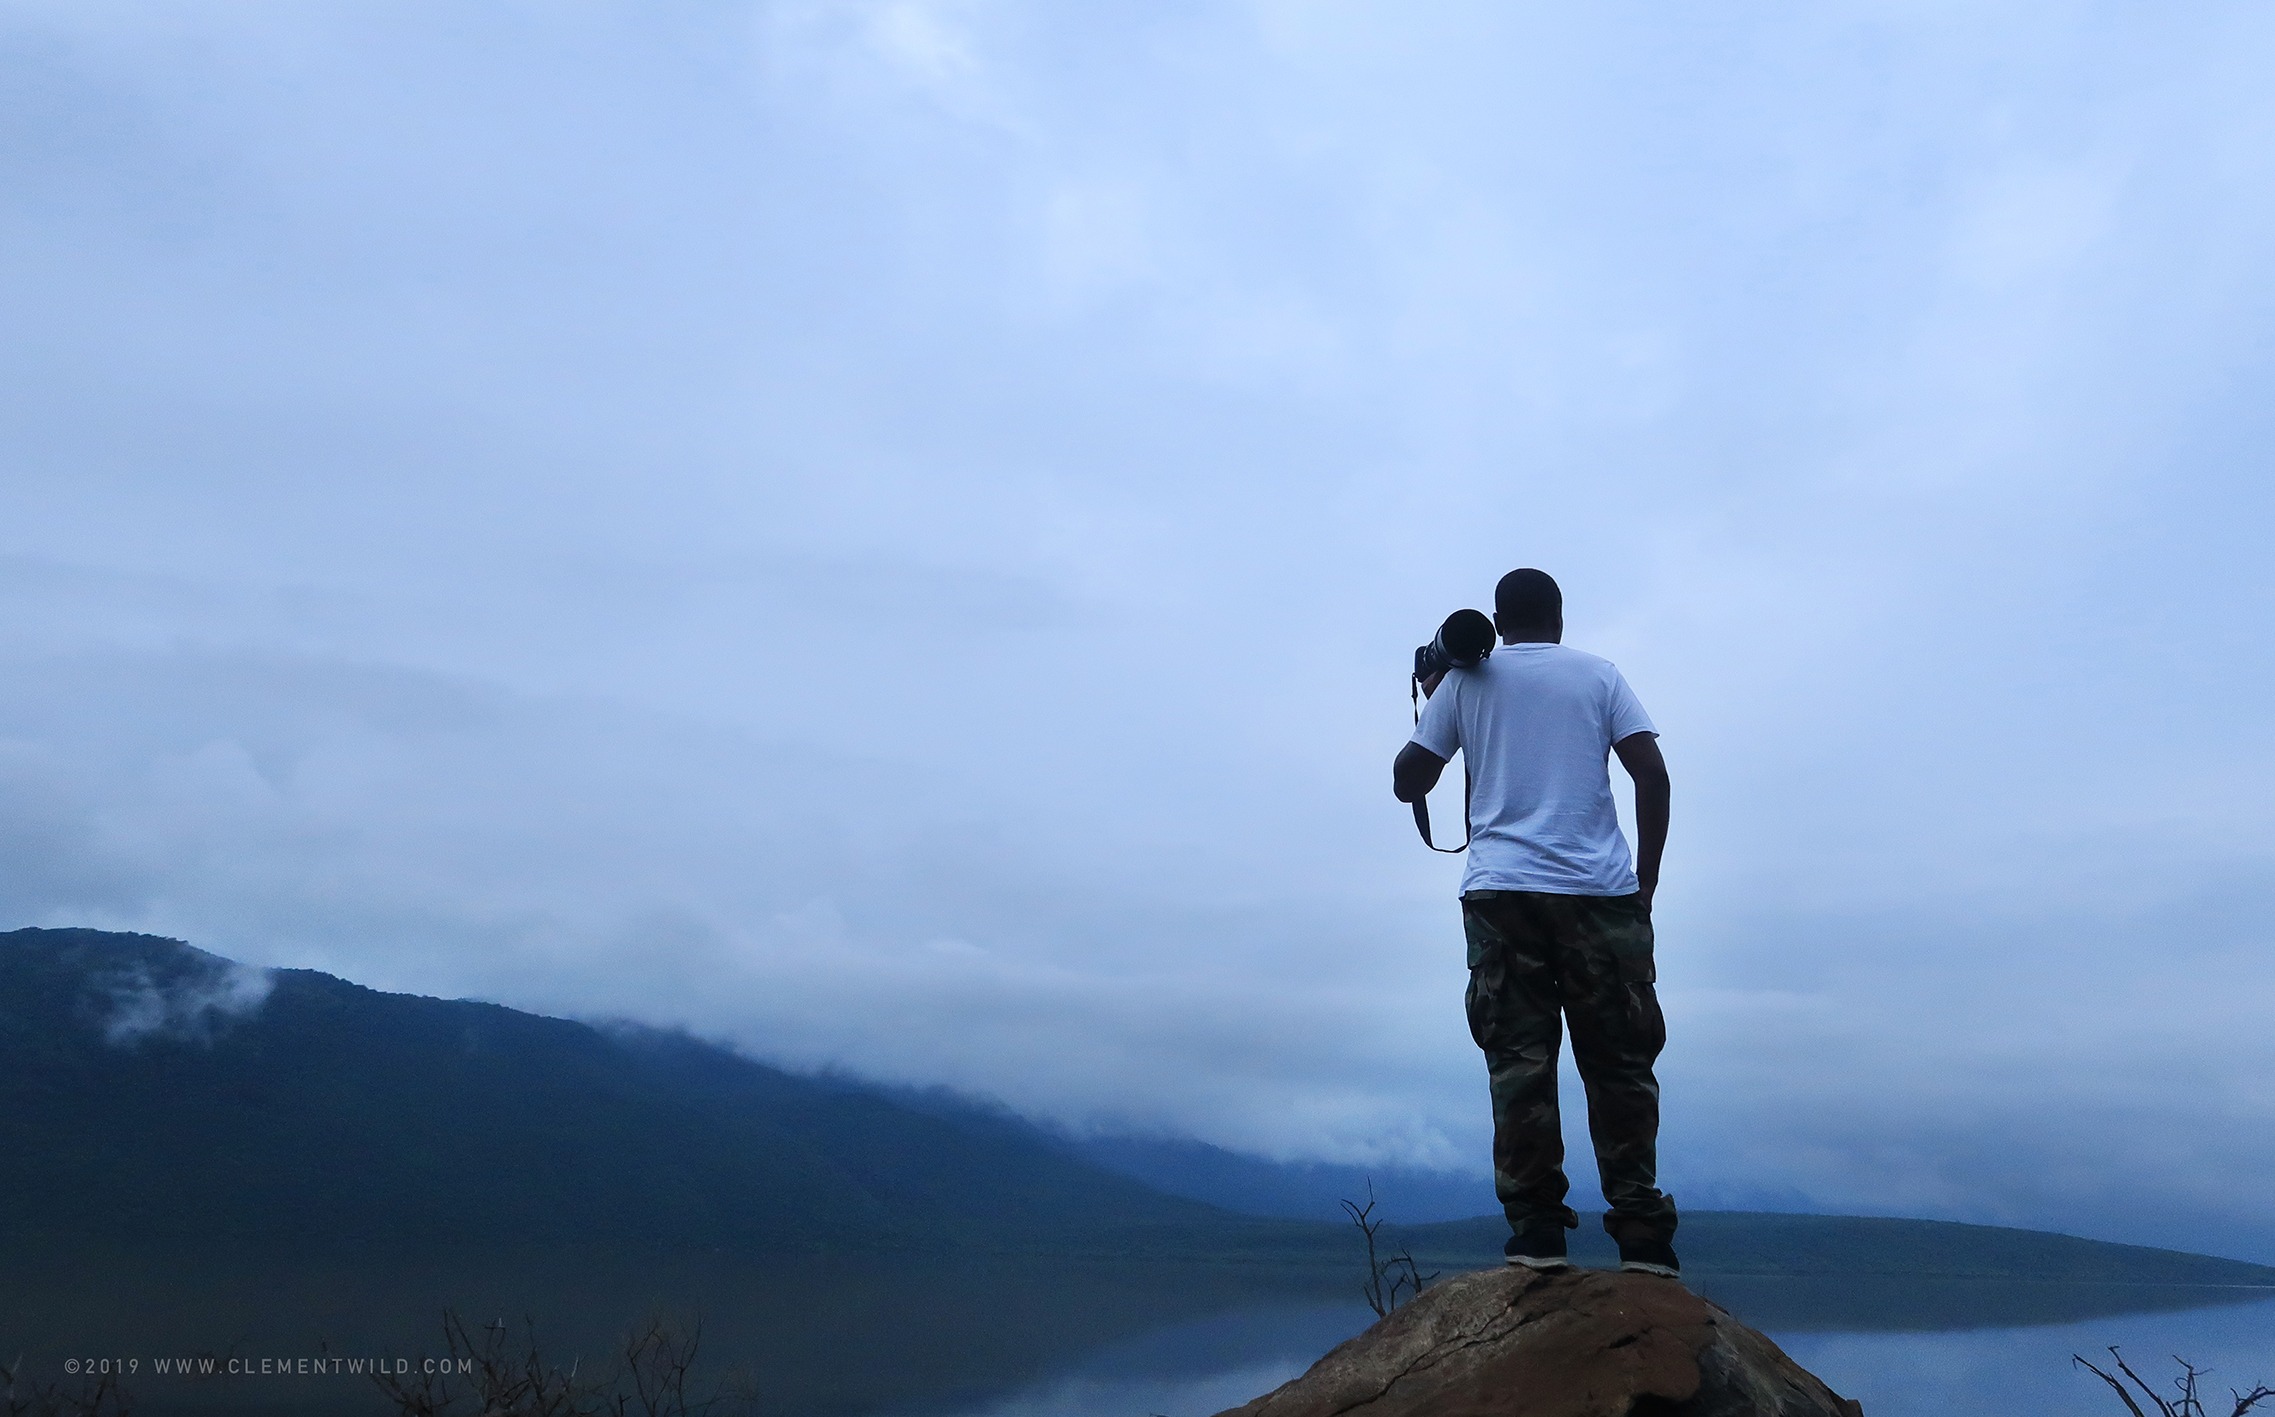 Clement Kiragu | Clement Wild holding a wildlife camera on a lake